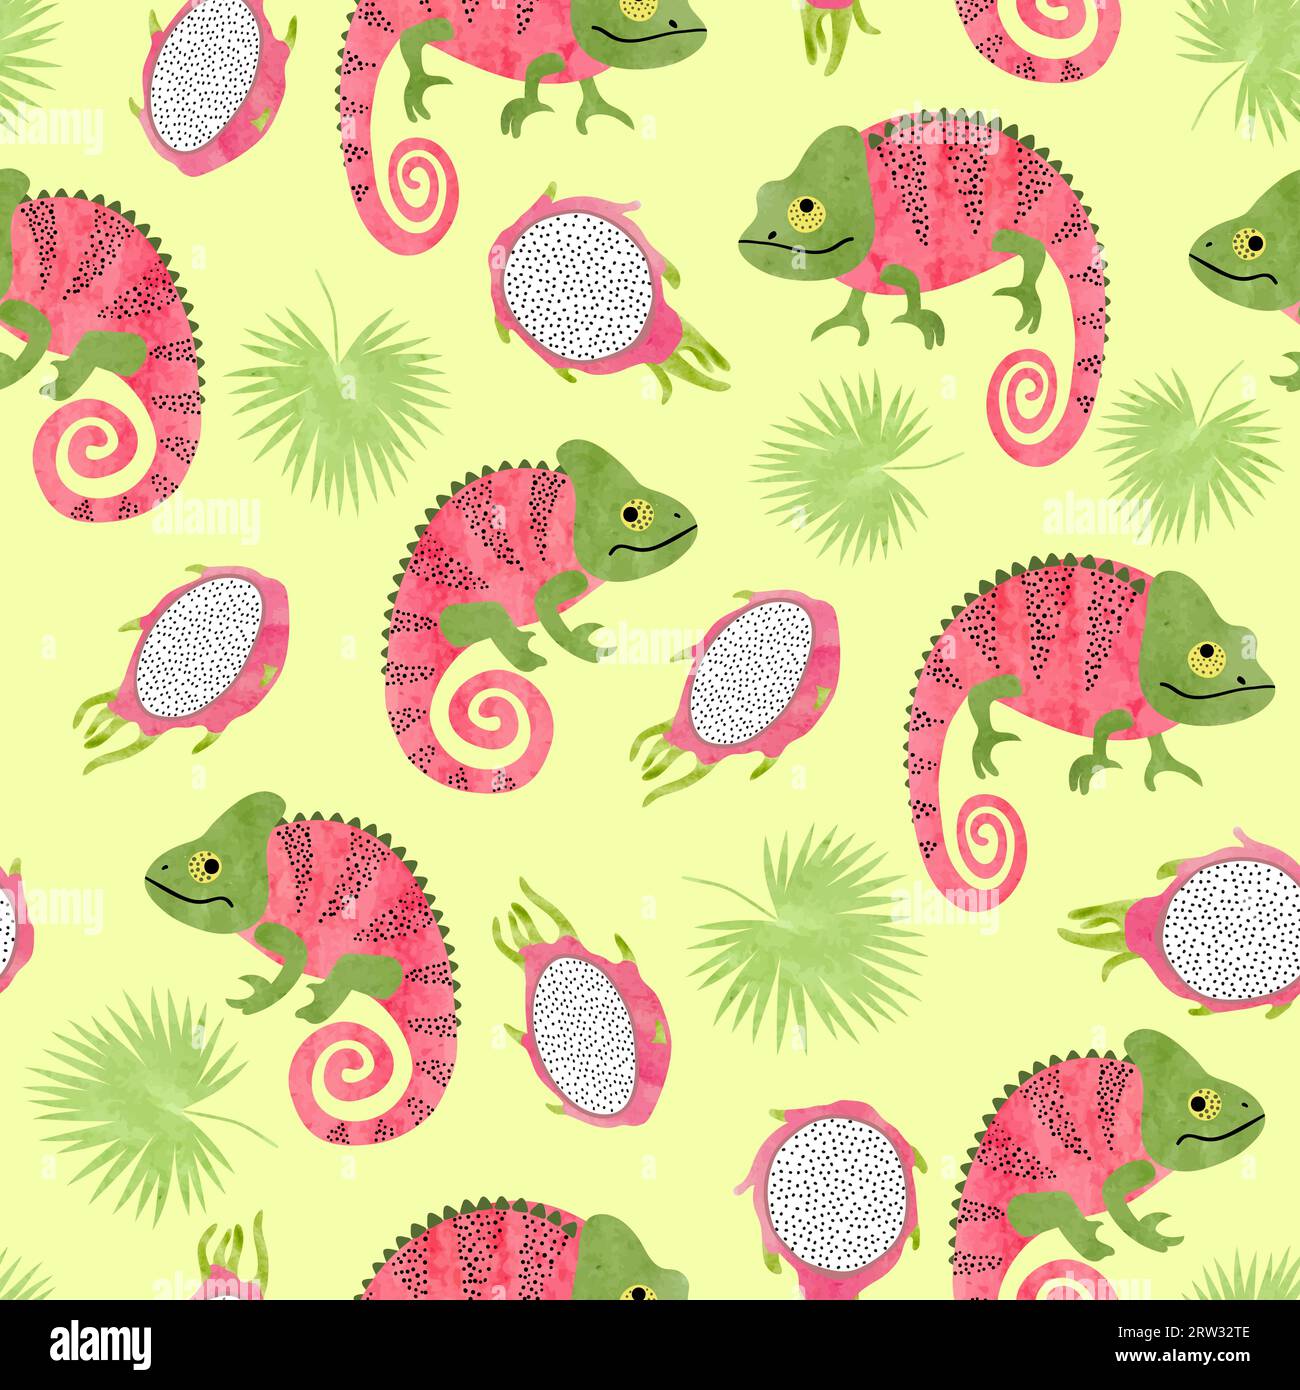 Seamless tropical pattern with chameleons and dragon fruits. Stock Vector